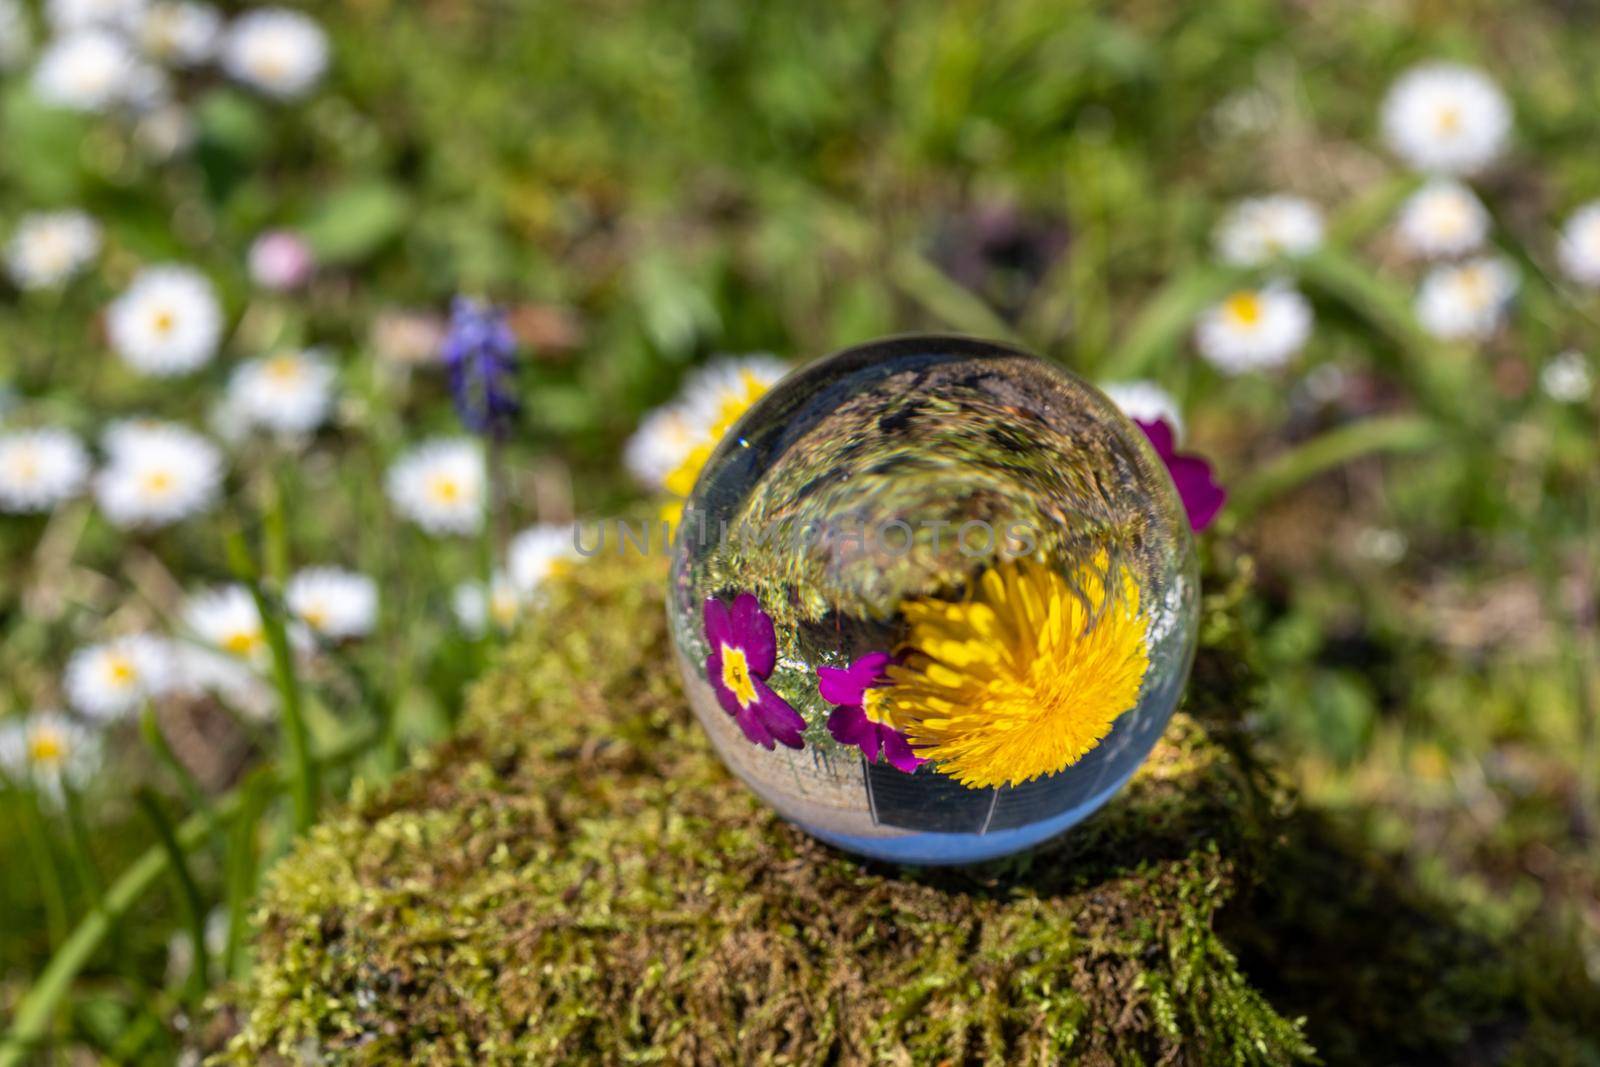 Crystal ball with dandelion and purple primrose blossom on moss covered stone  by reinerc